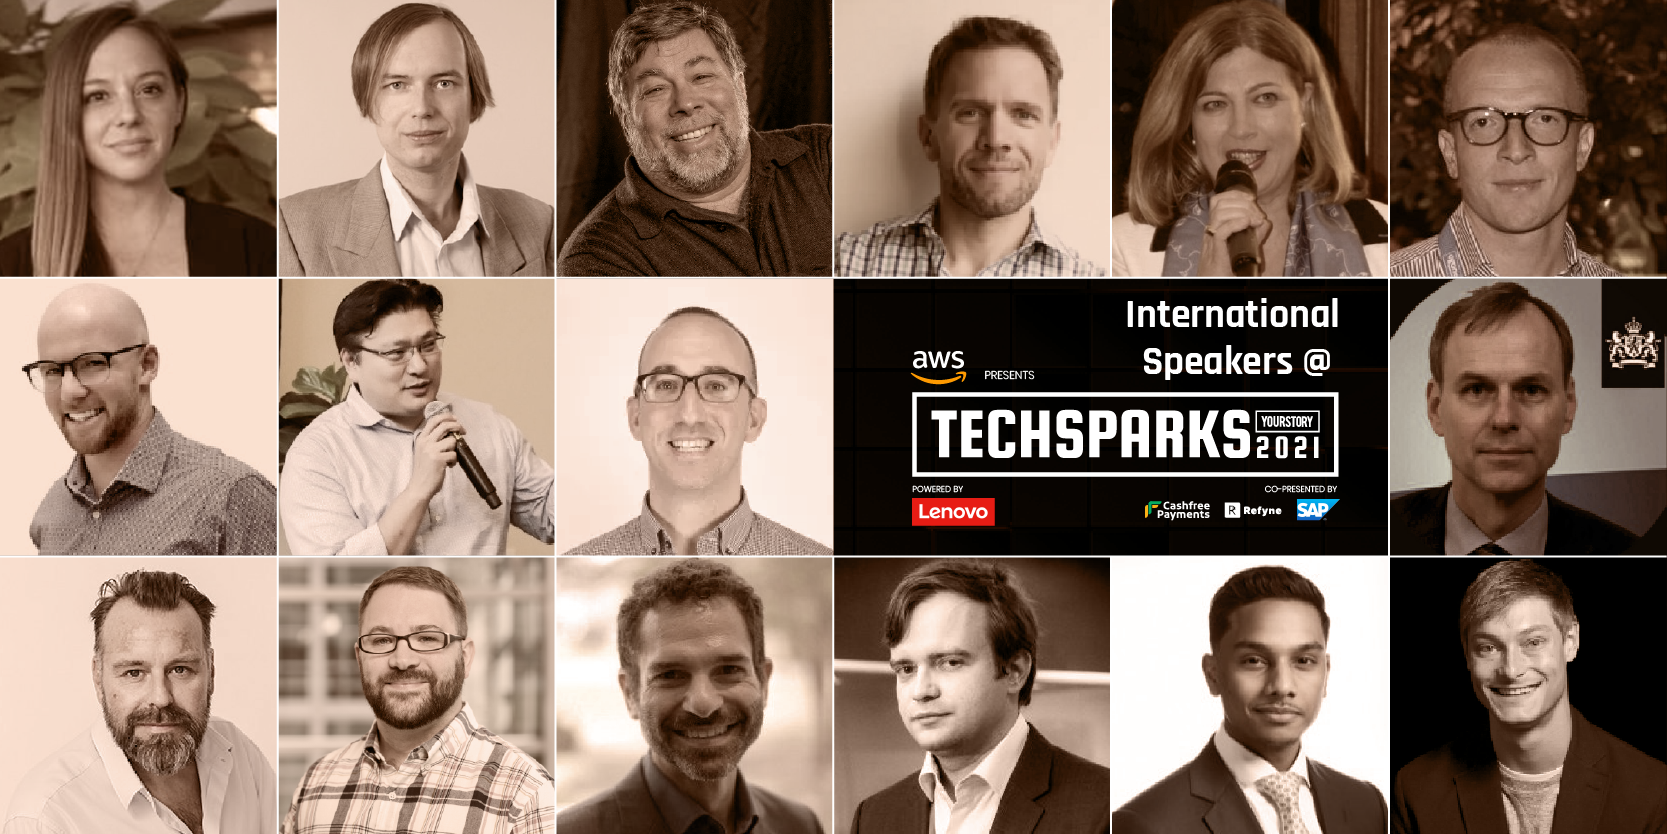 From Apple co-founder Steve Wozniak, to Thejo Kote who travelled over 13,000 kms to set up Airbase: meet the international speakers at TechSparks 2021